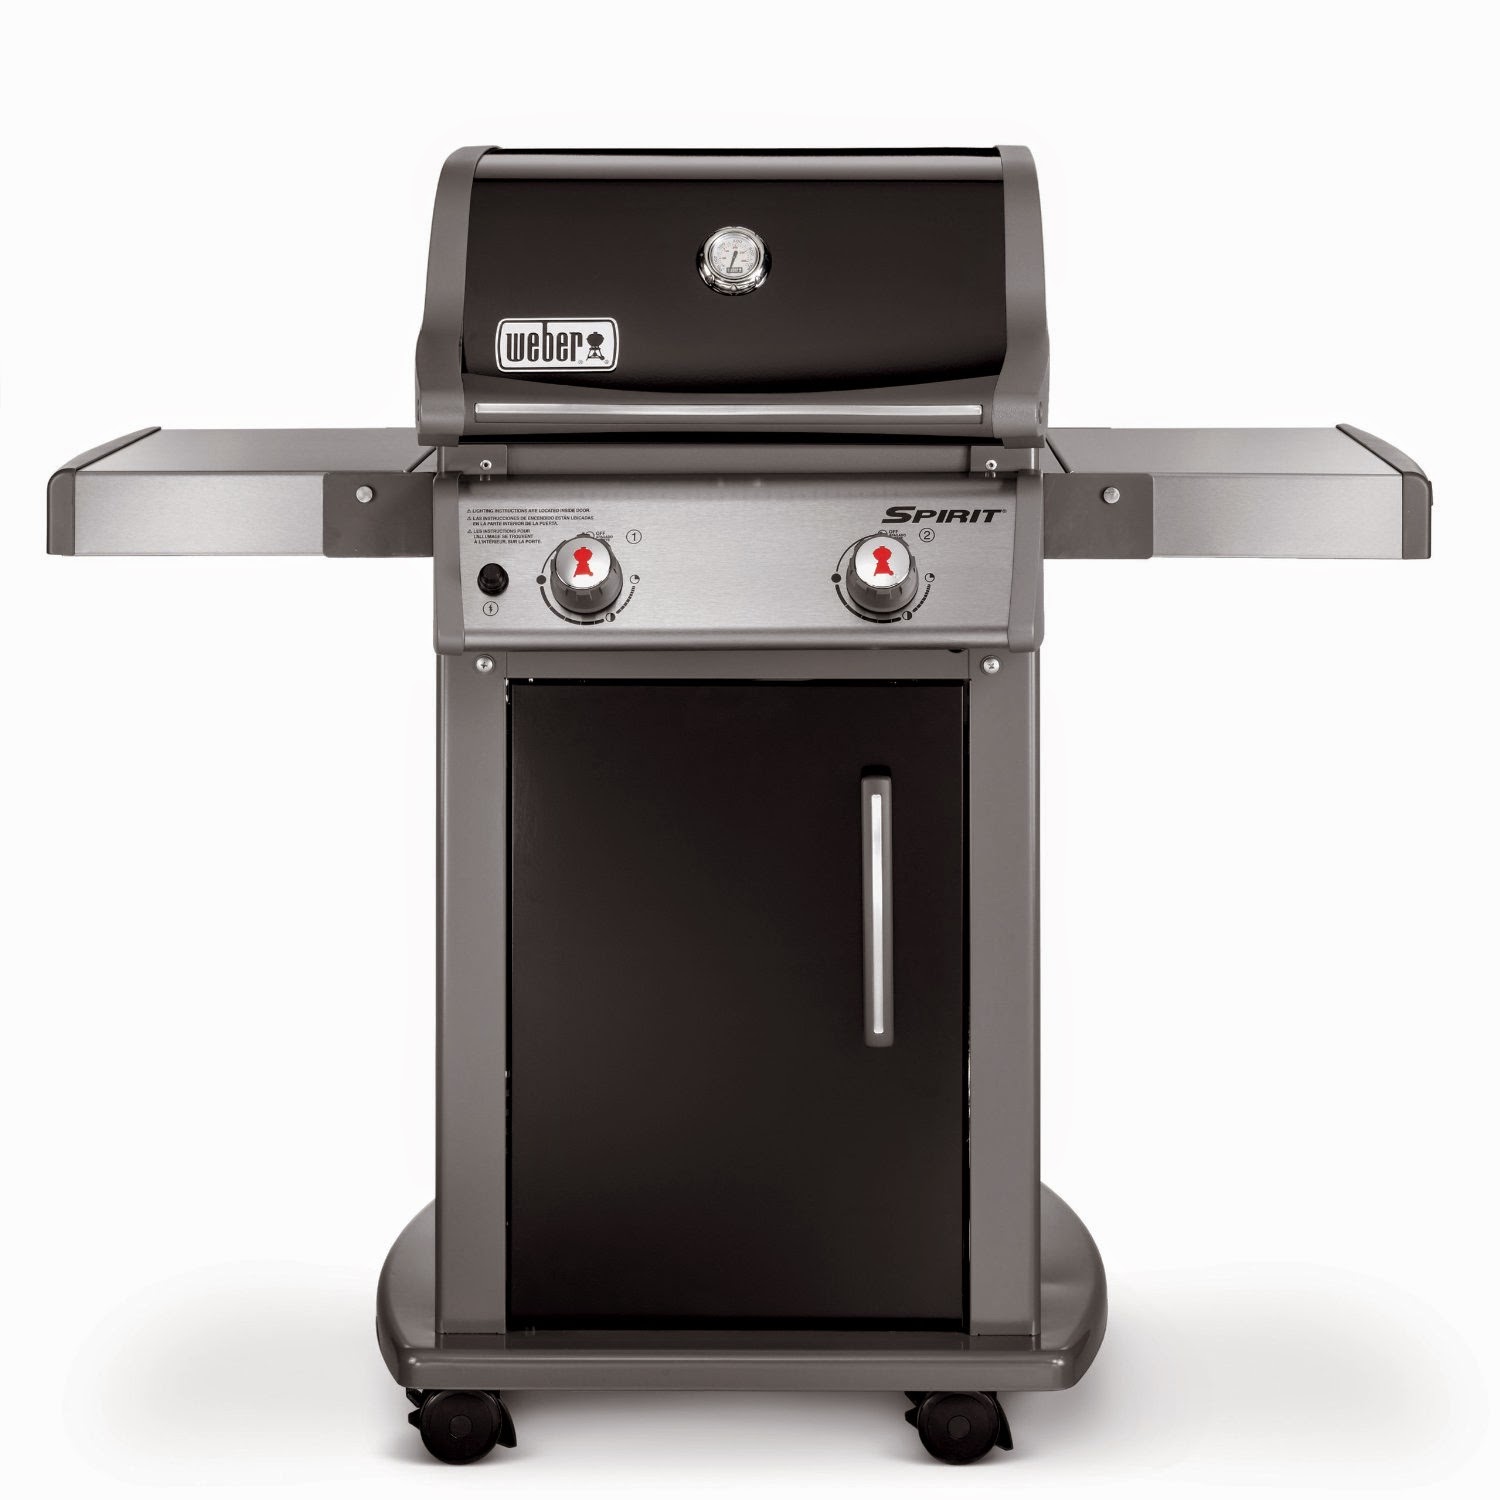 Free-standing Gas Grill, advantages of gas grills over charcoal grills, easier and safer to use